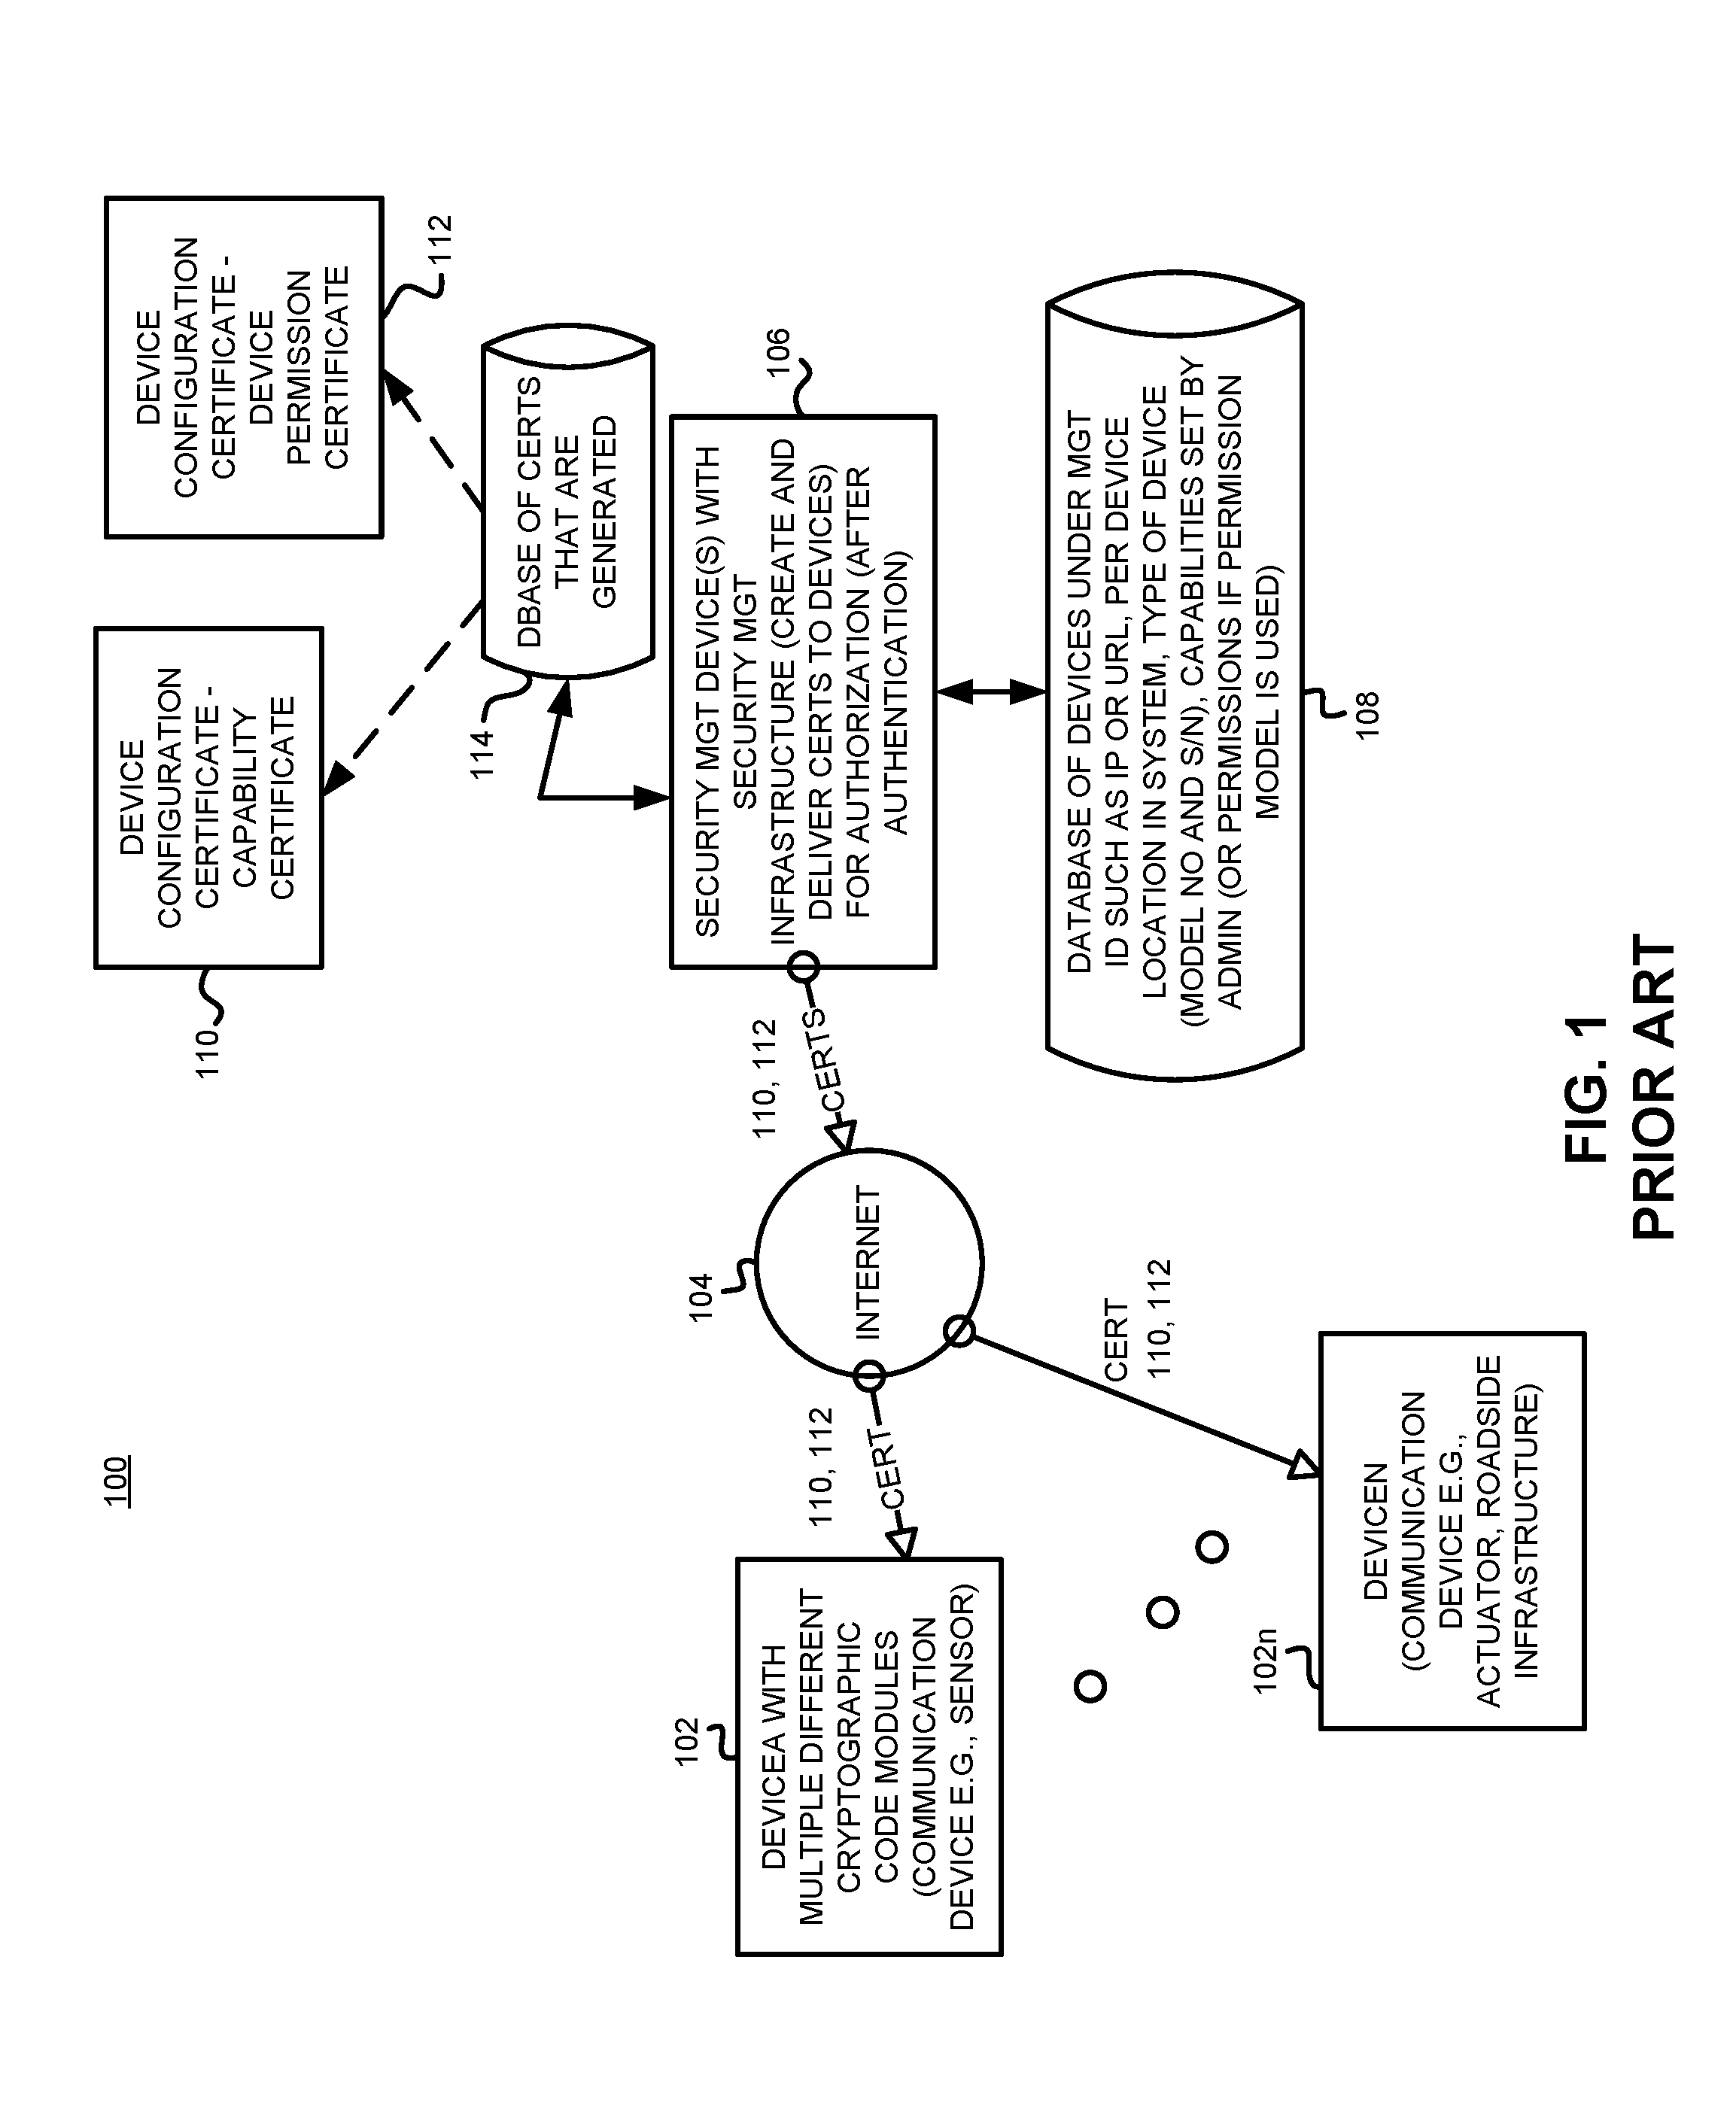 Method and apparatus for providing secure communication among constrained devices